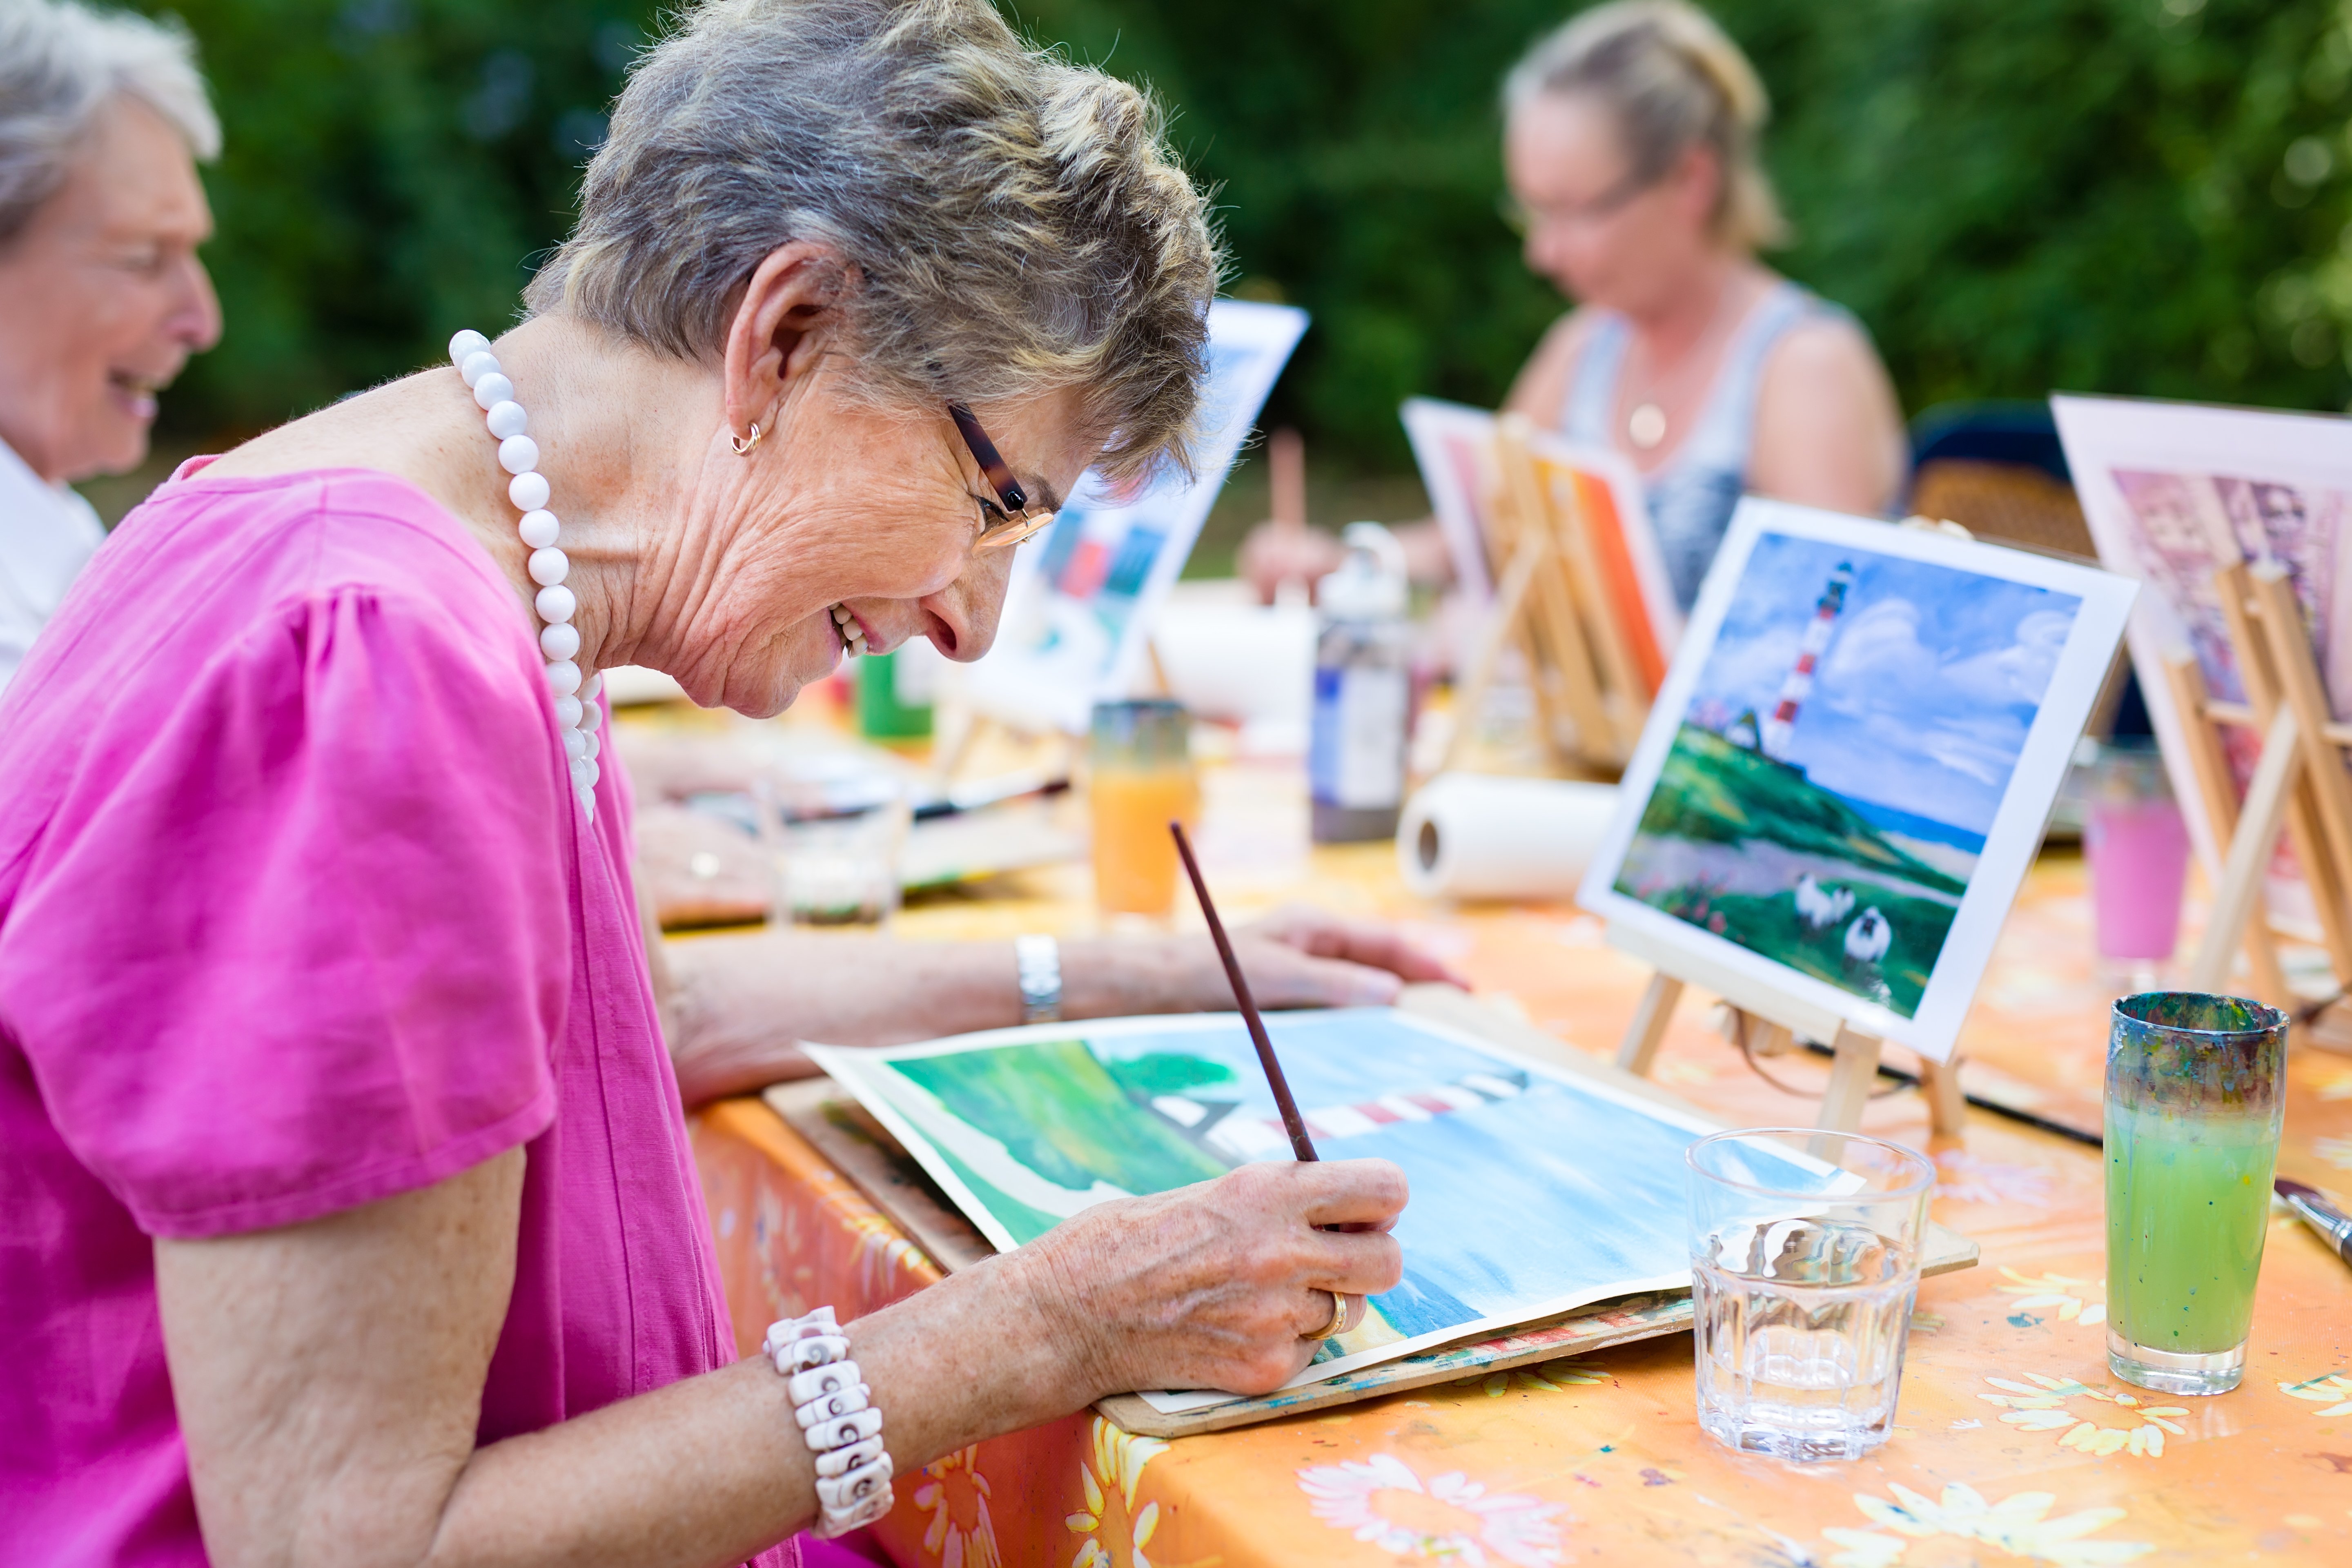 Women painting outside at a table with others and enjoying her time